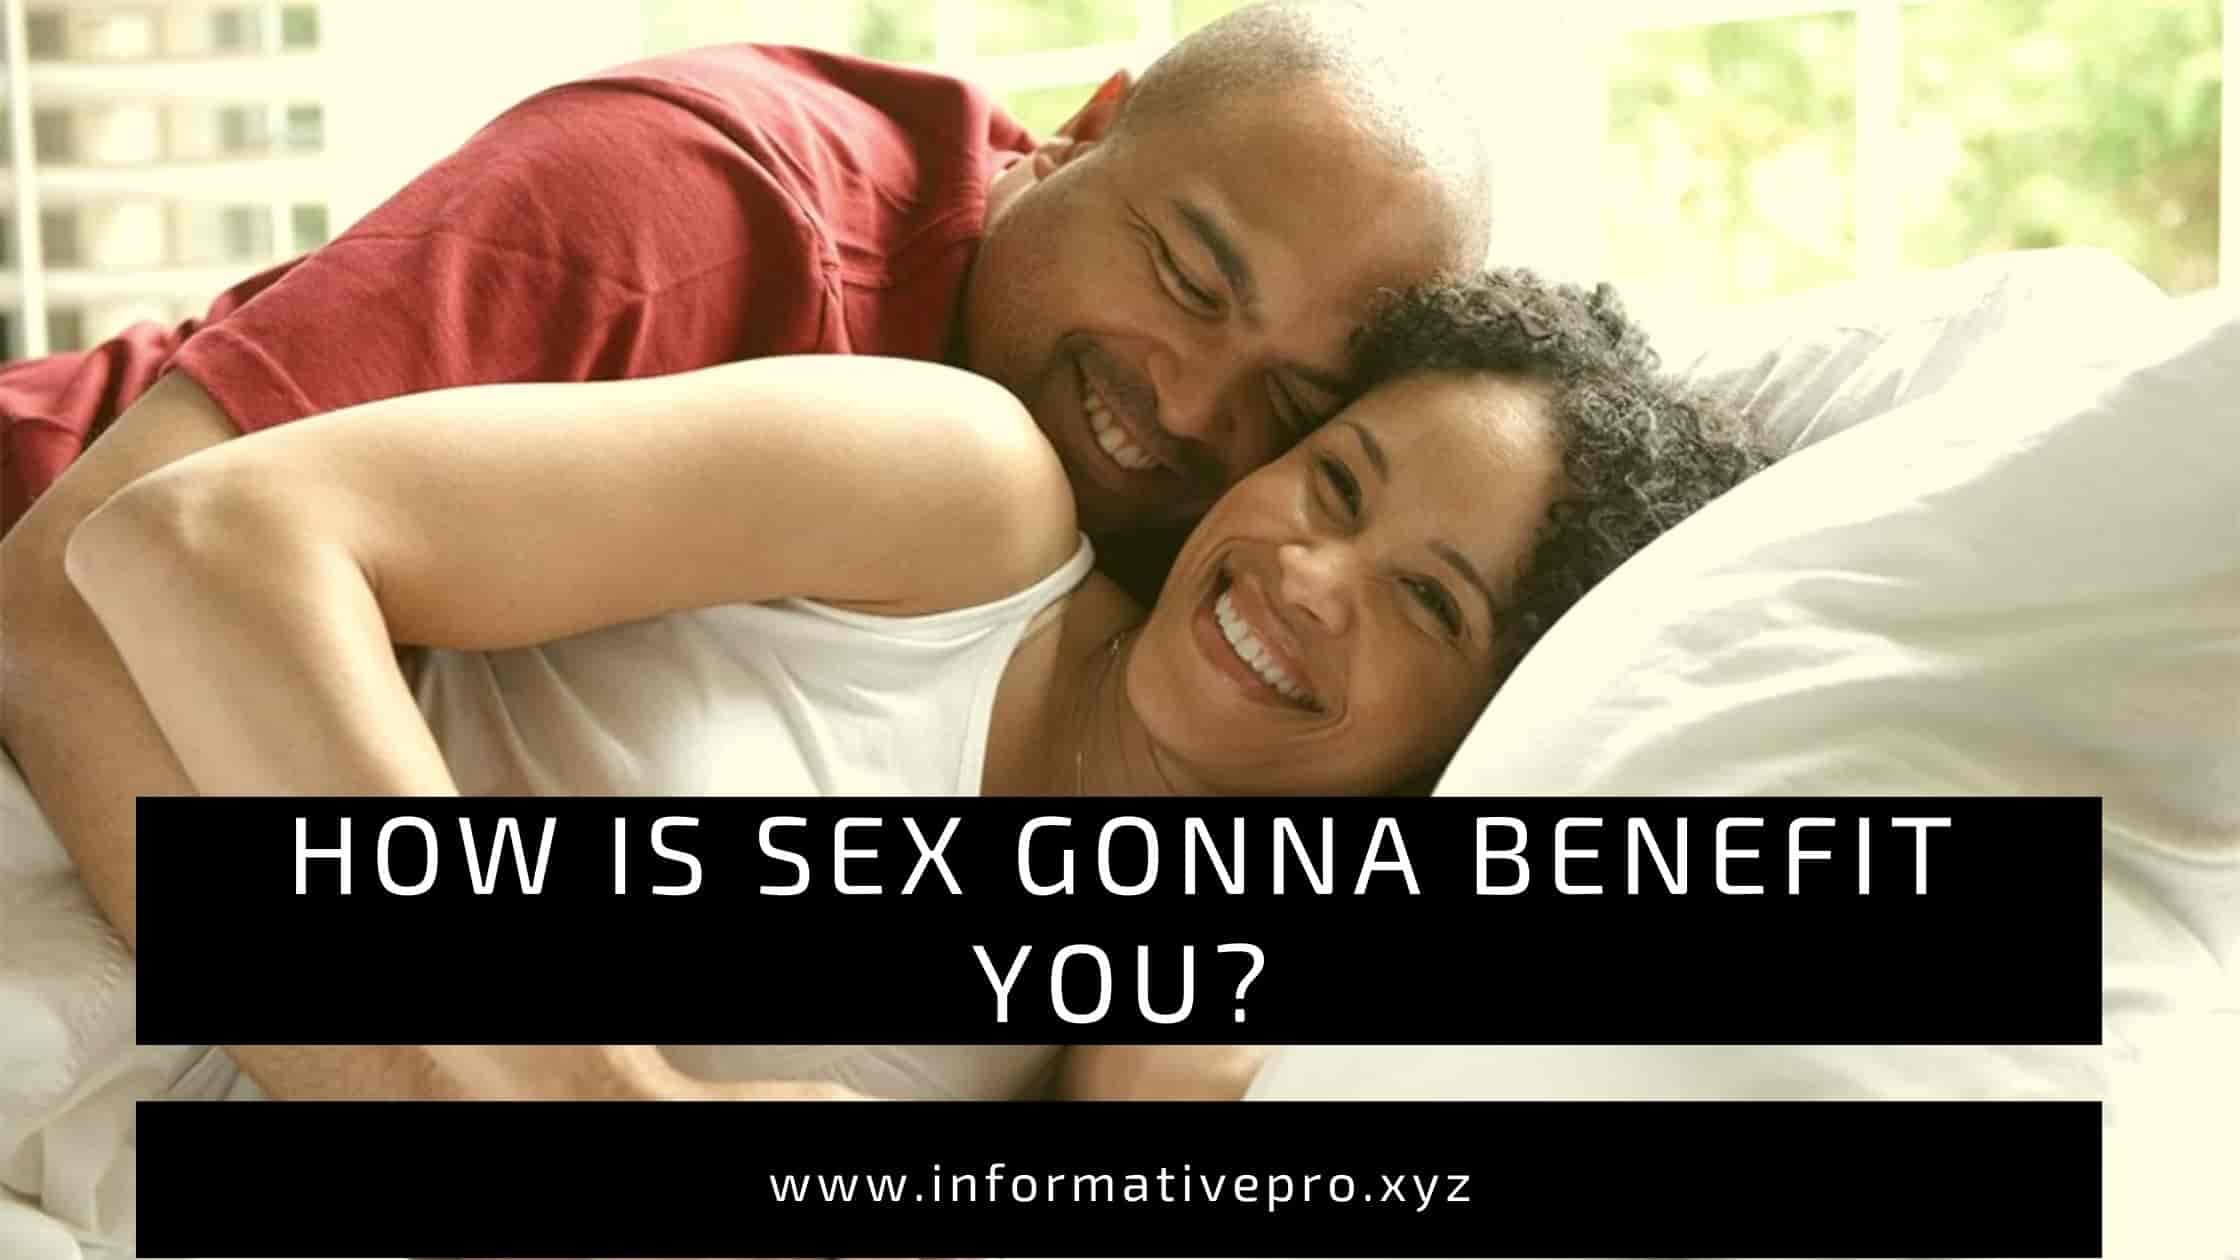 How is sex gonna benefit you?